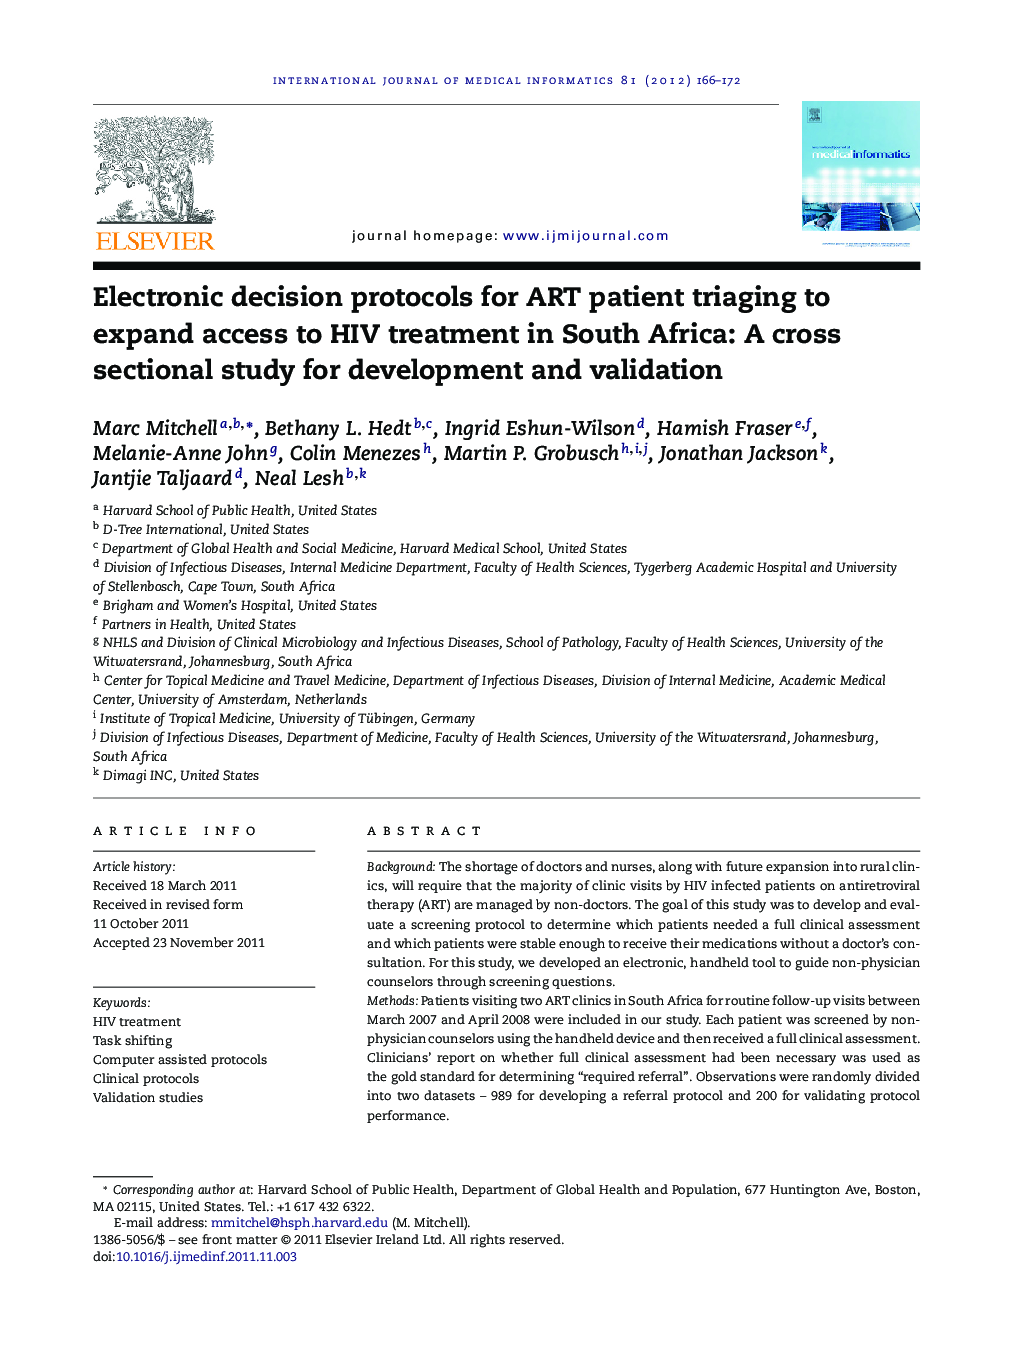 Electronic decision protocols for ART patient triaging to expand access to HIV treatment in South Africa: A cross sectional study for development and validation